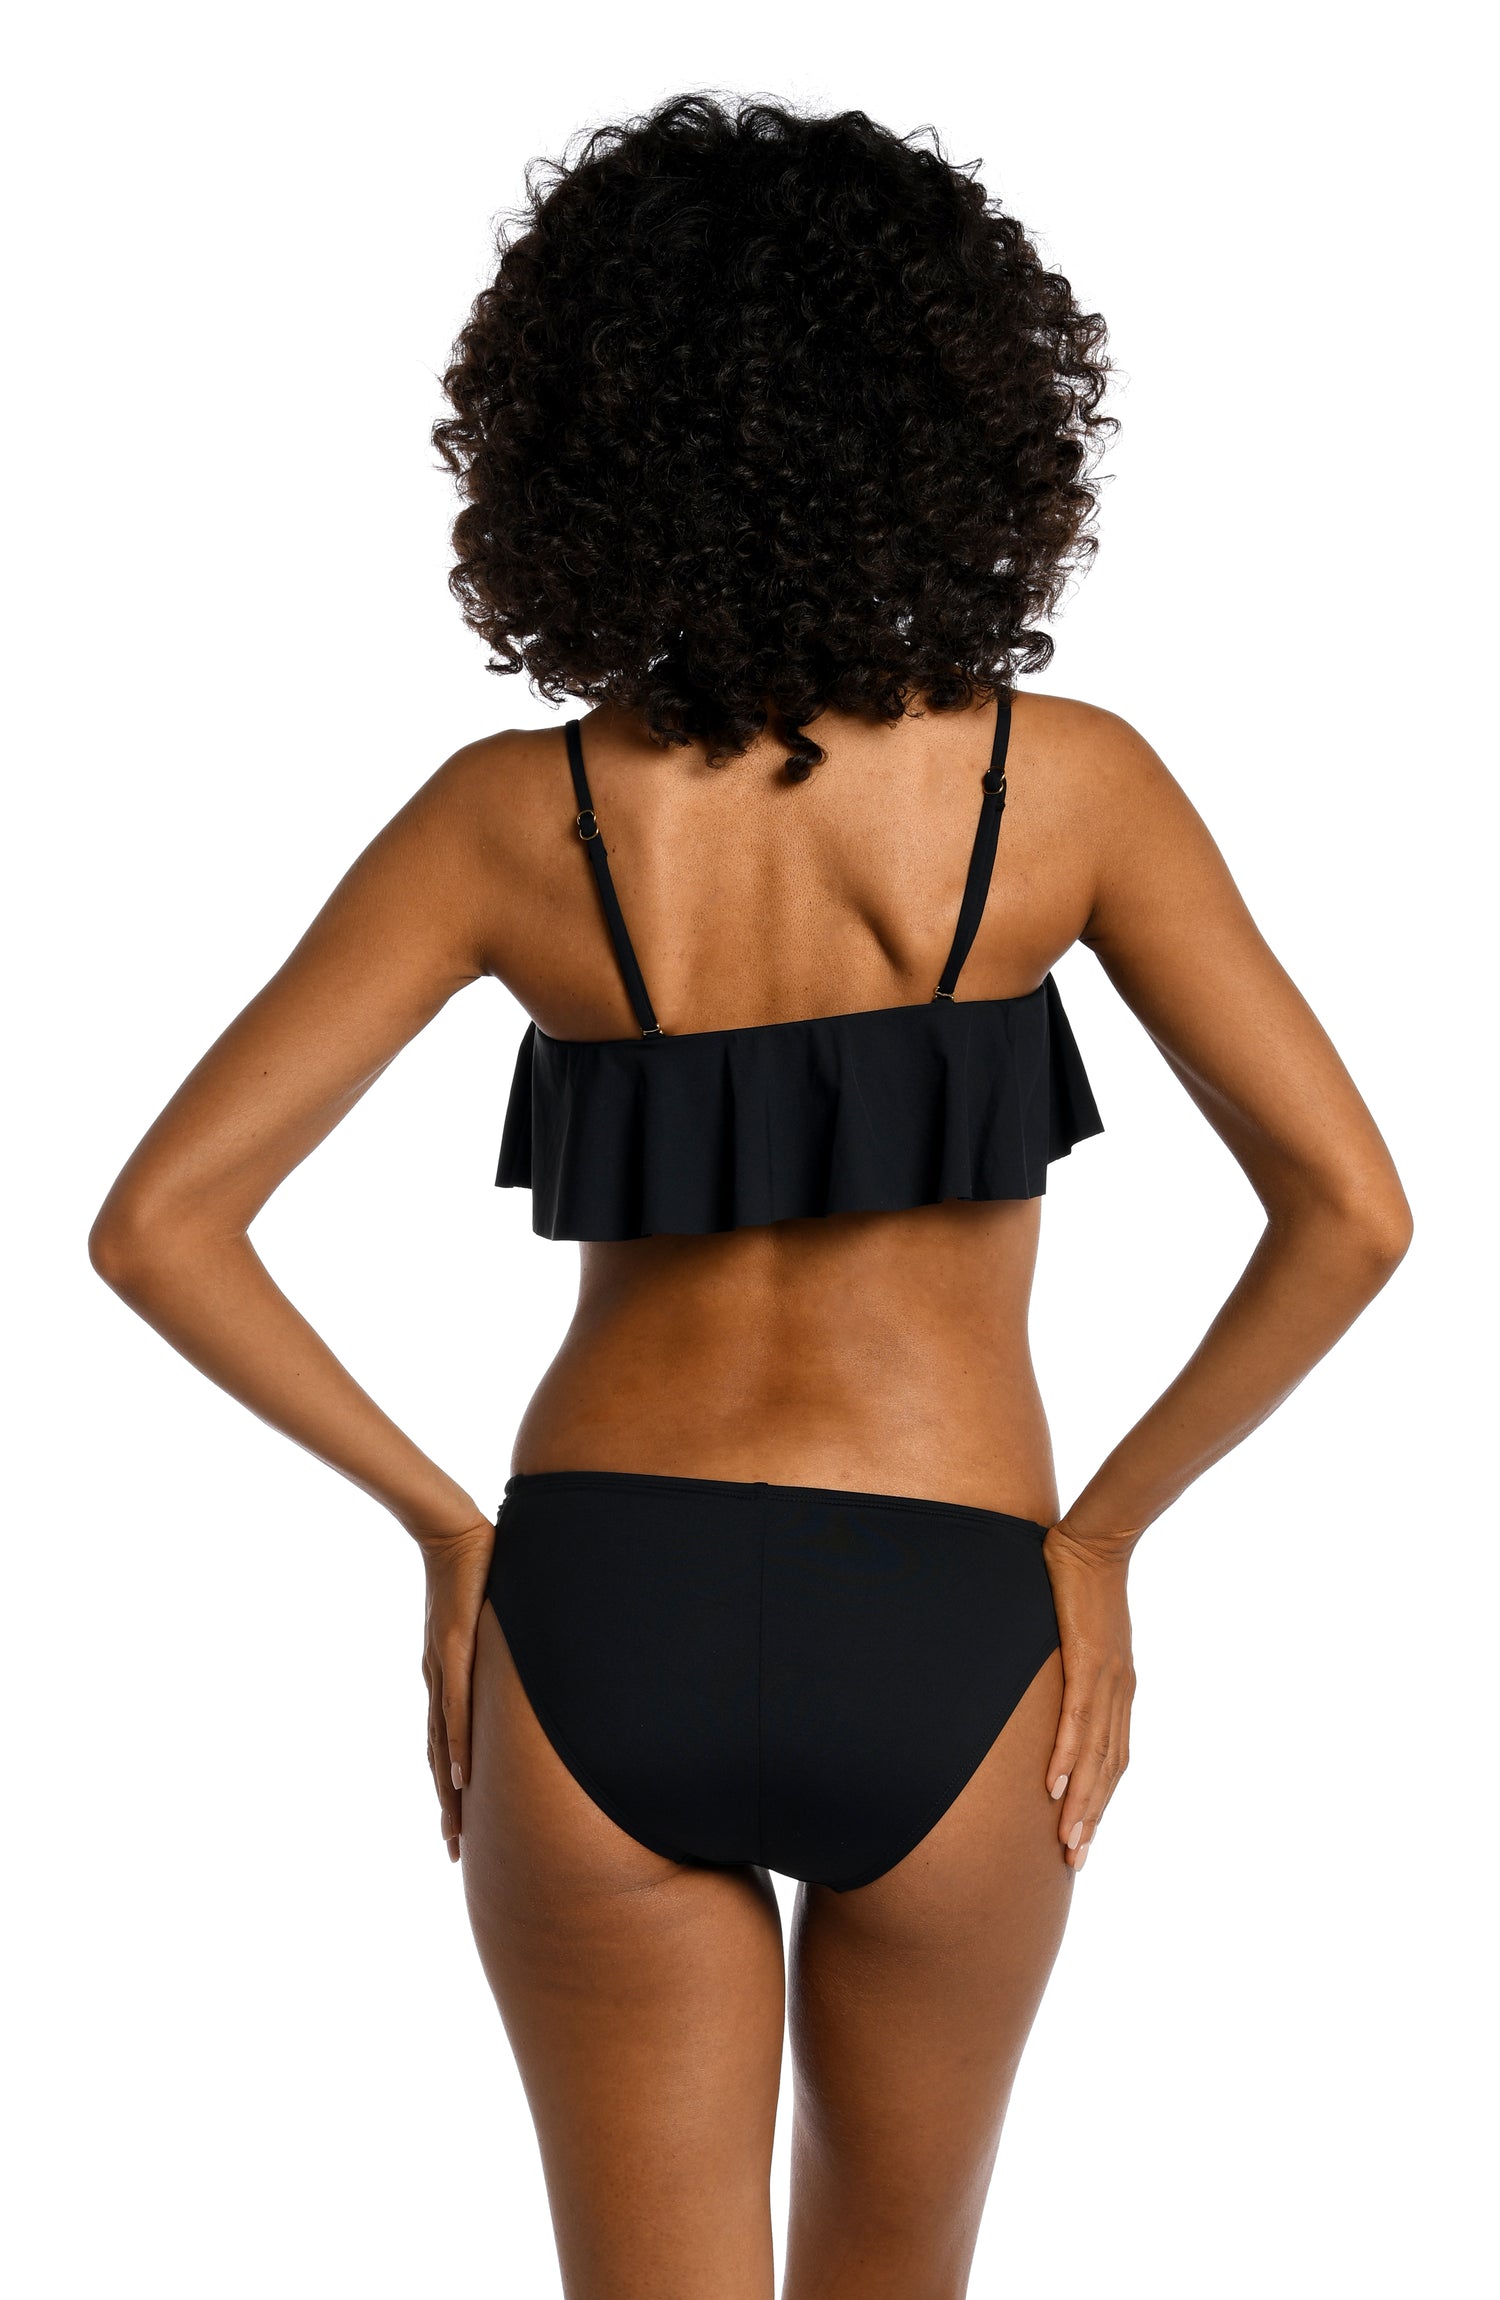 Model is wearing a black ruffle bandeau swimsuit top from our Best-Selling Island Goddess collection.